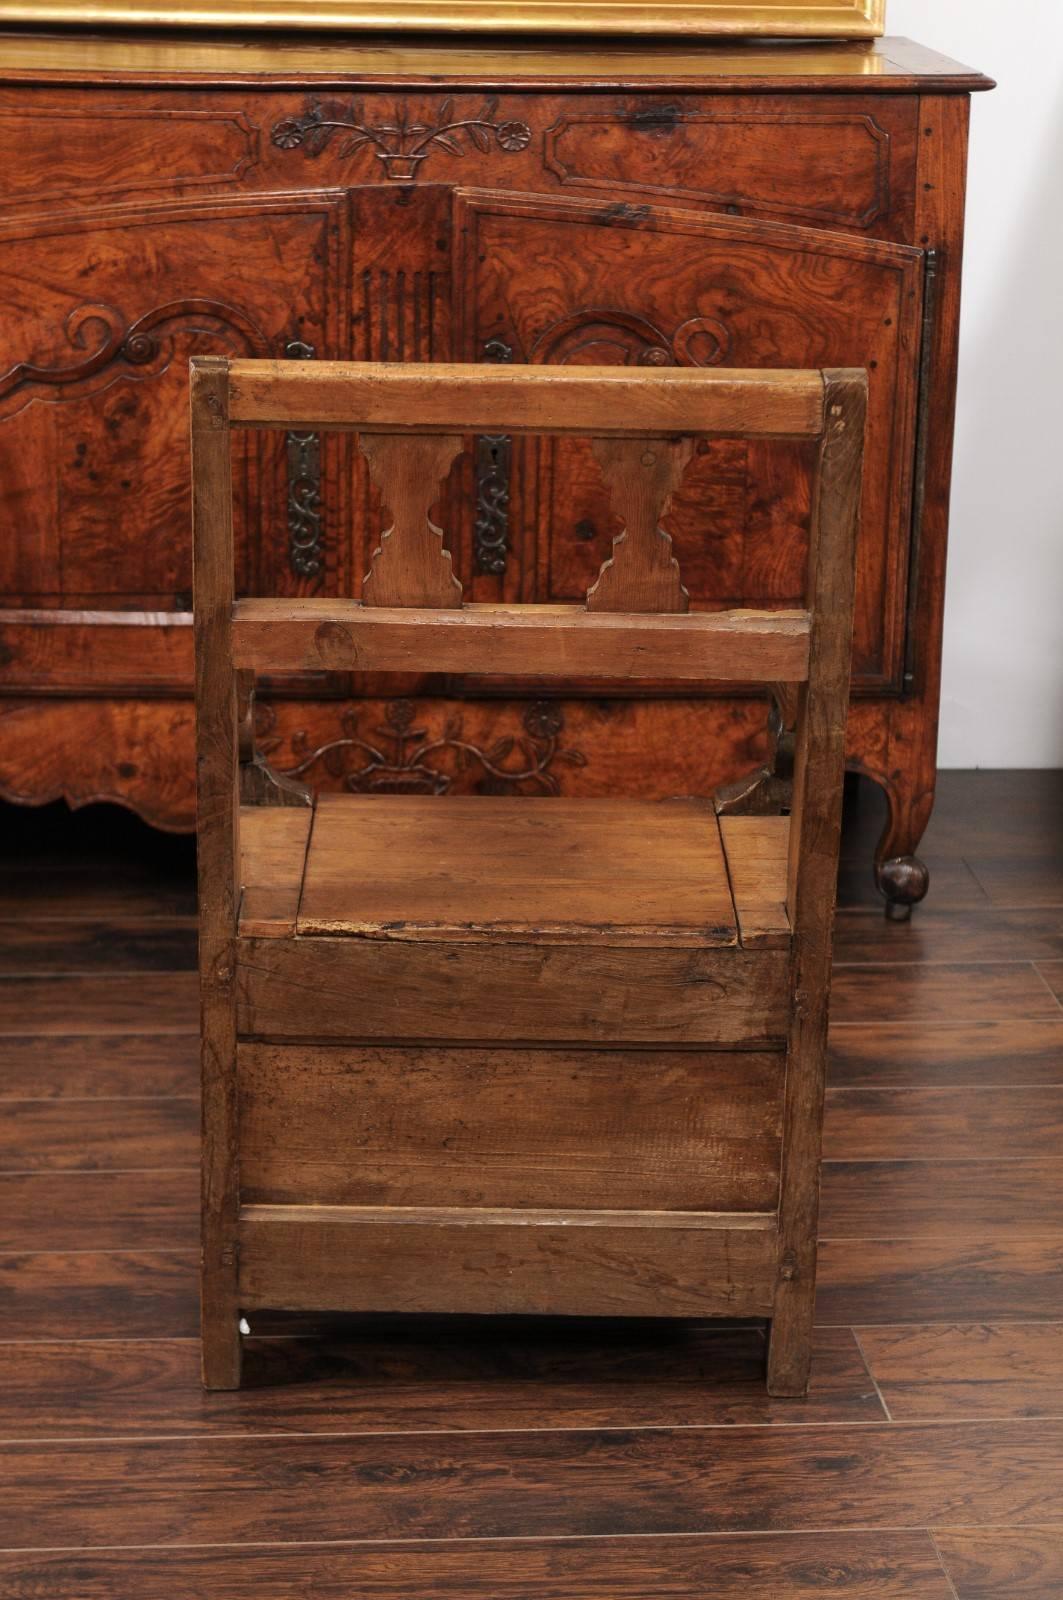 English Country Pine Chair circa 1800 with Scrolled Arms and Lift-Top Seat For Sale 1